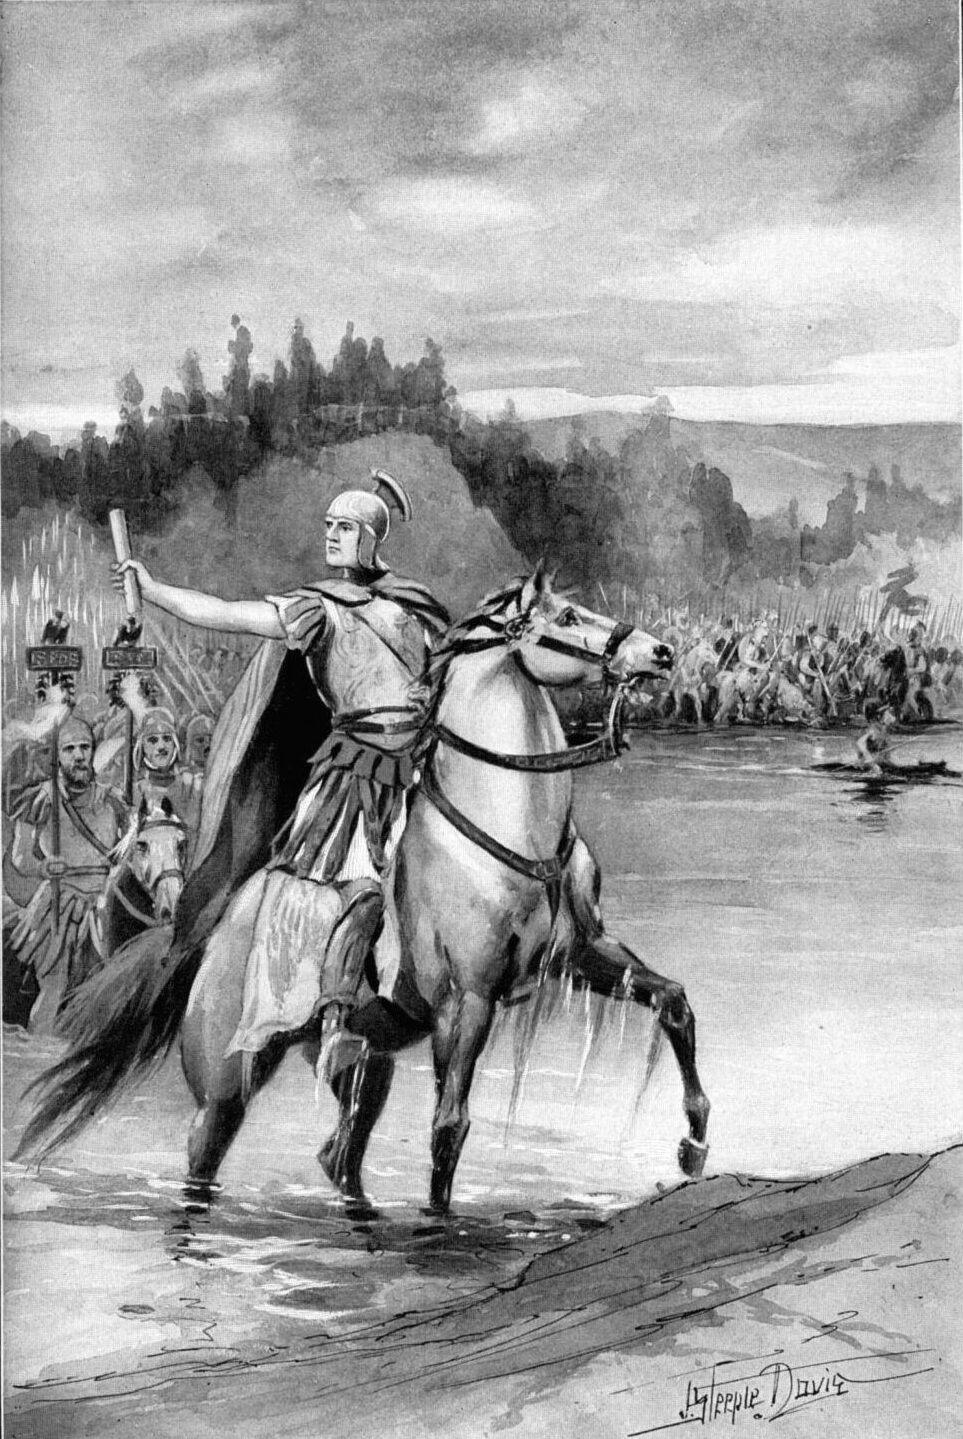 Caesar was branded an enemy of the Republic for crossing the Rubicon River with his troops in January 49 bc.